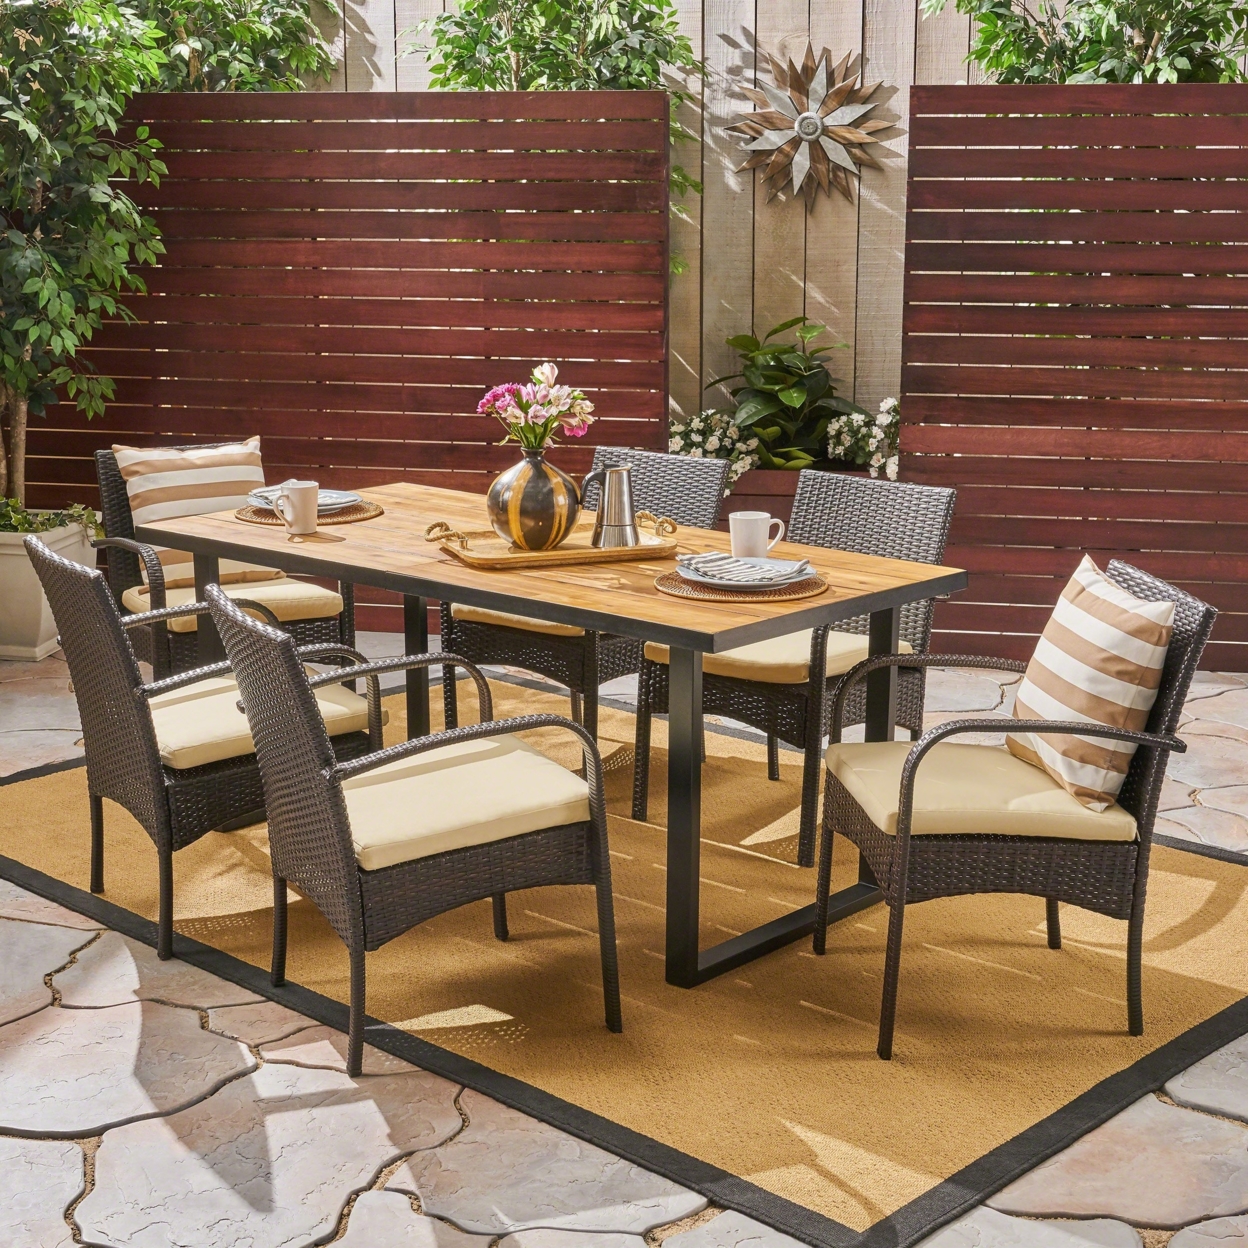 Bunny Outdoor 6-Seater Rectangular Acacia Wood And Wicker Dining Set, Teak With Black And Multi Brown With Cream